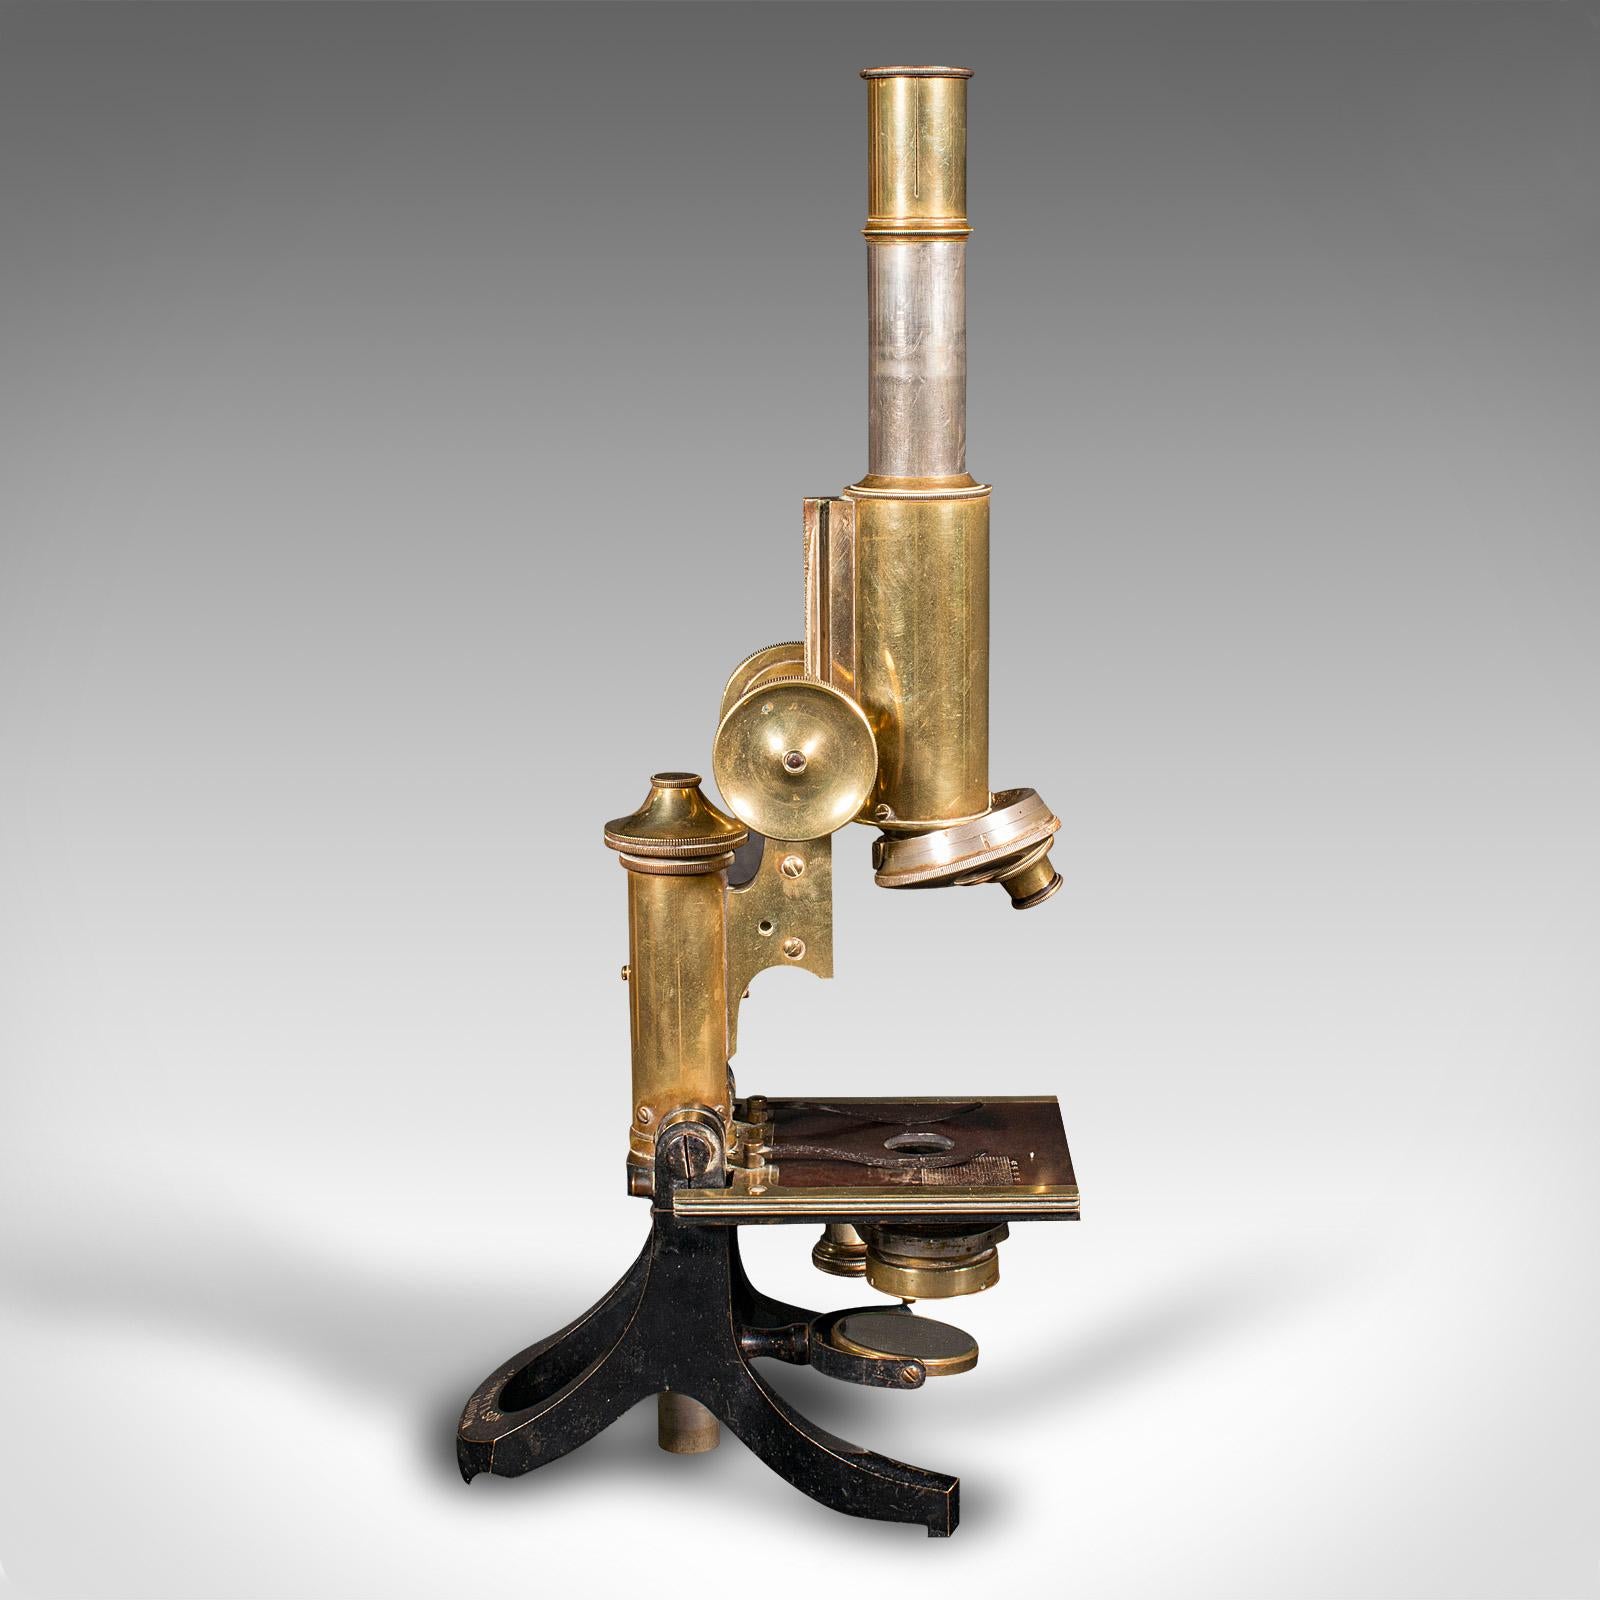 first microscope was invented by